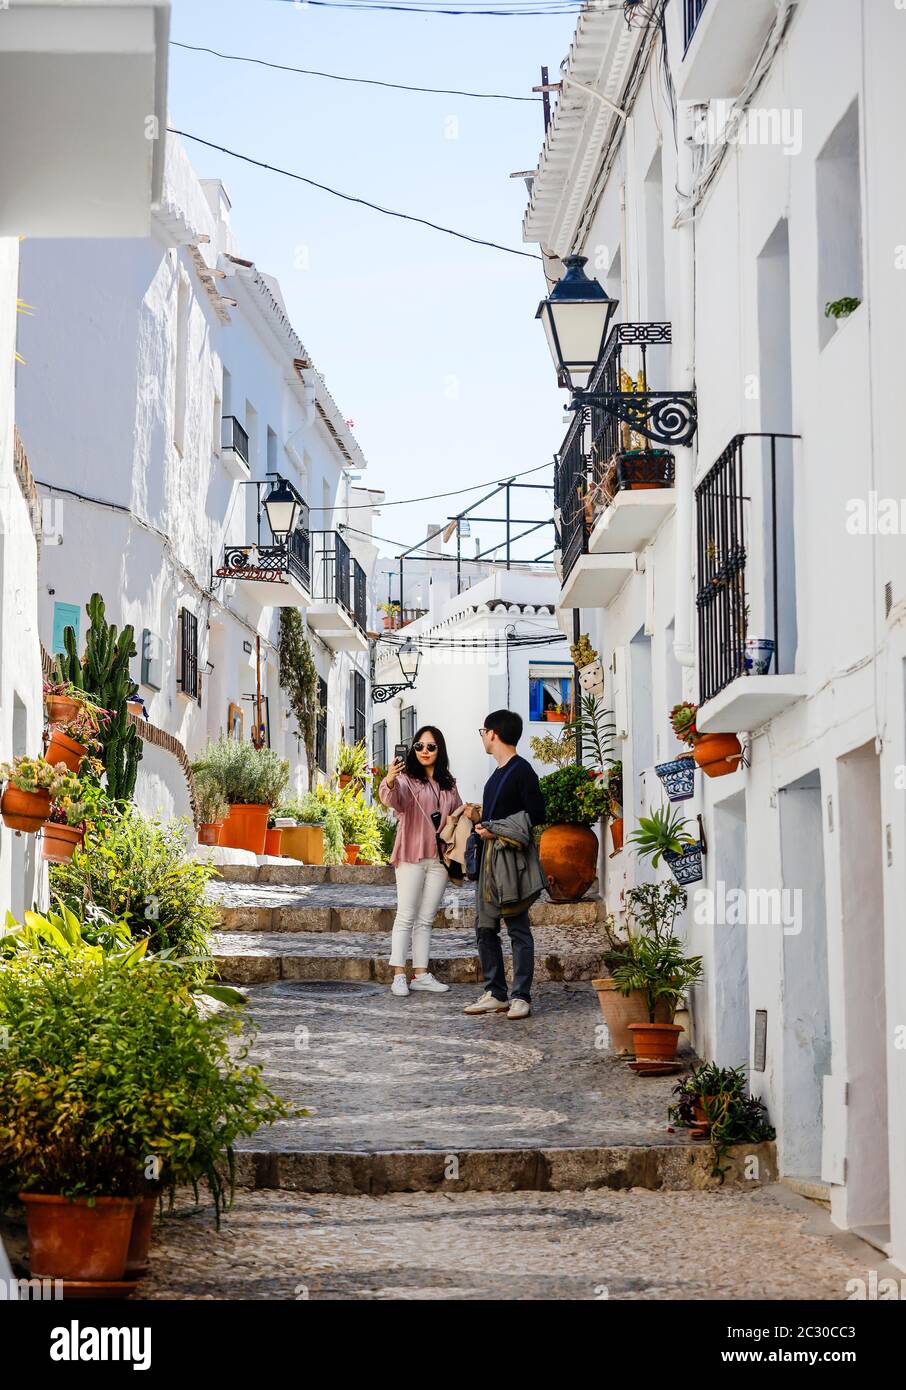 Asian tourists take pictures of themselves in picturesque alleys in the white mountain village of Frigiliana, Frigiliana, province of Malaga Stock Photo